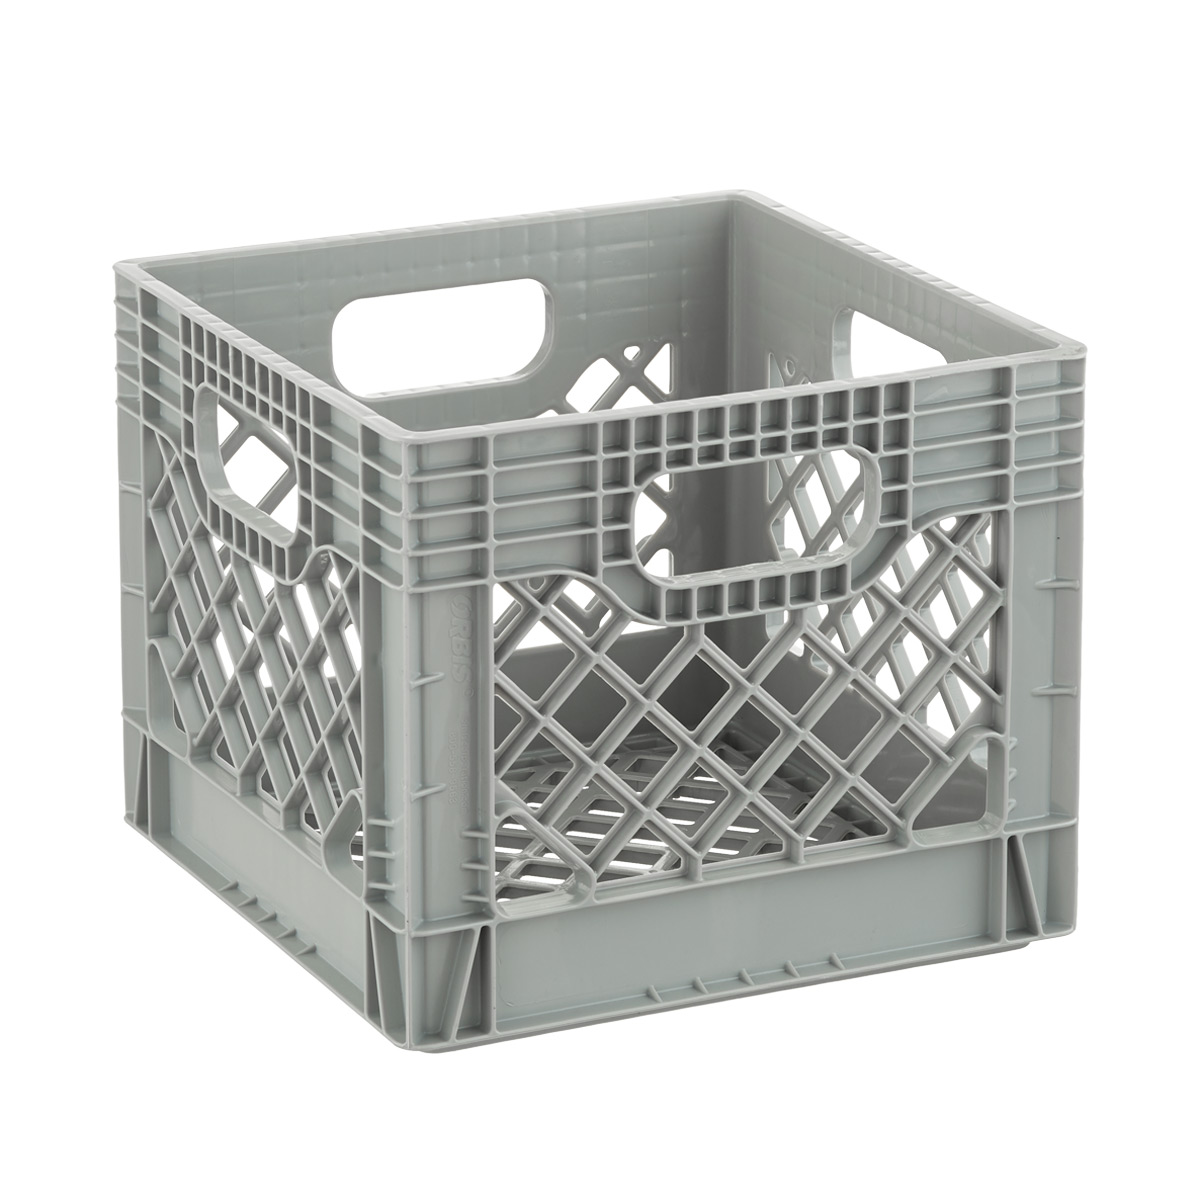 Milk Crate Grey, 13 sq. x 11 H | The Container Store